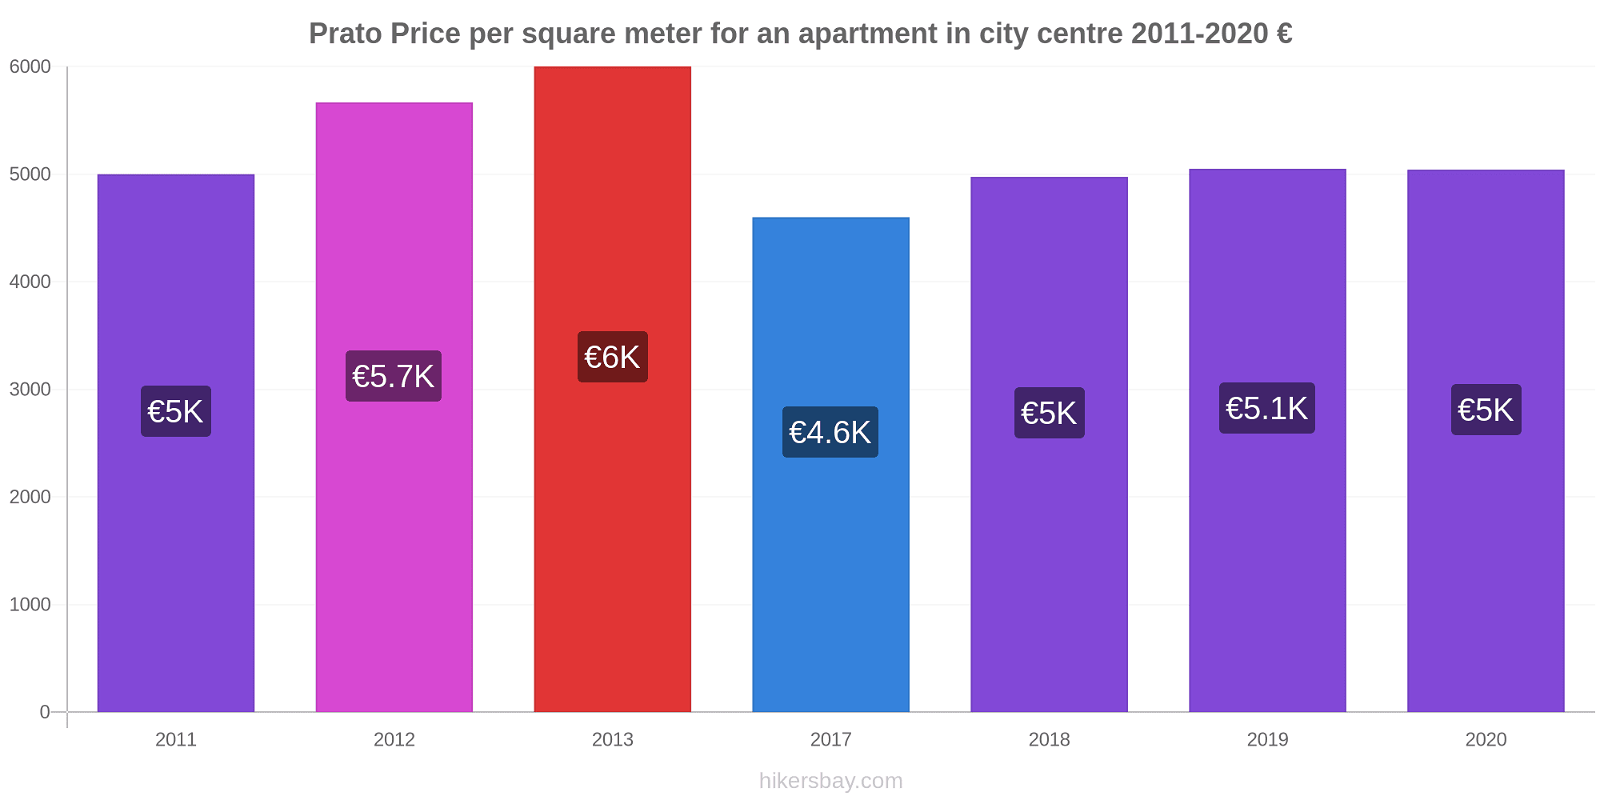 Prato price changes Price per square meter for an apartment in city centre hikersbay.com